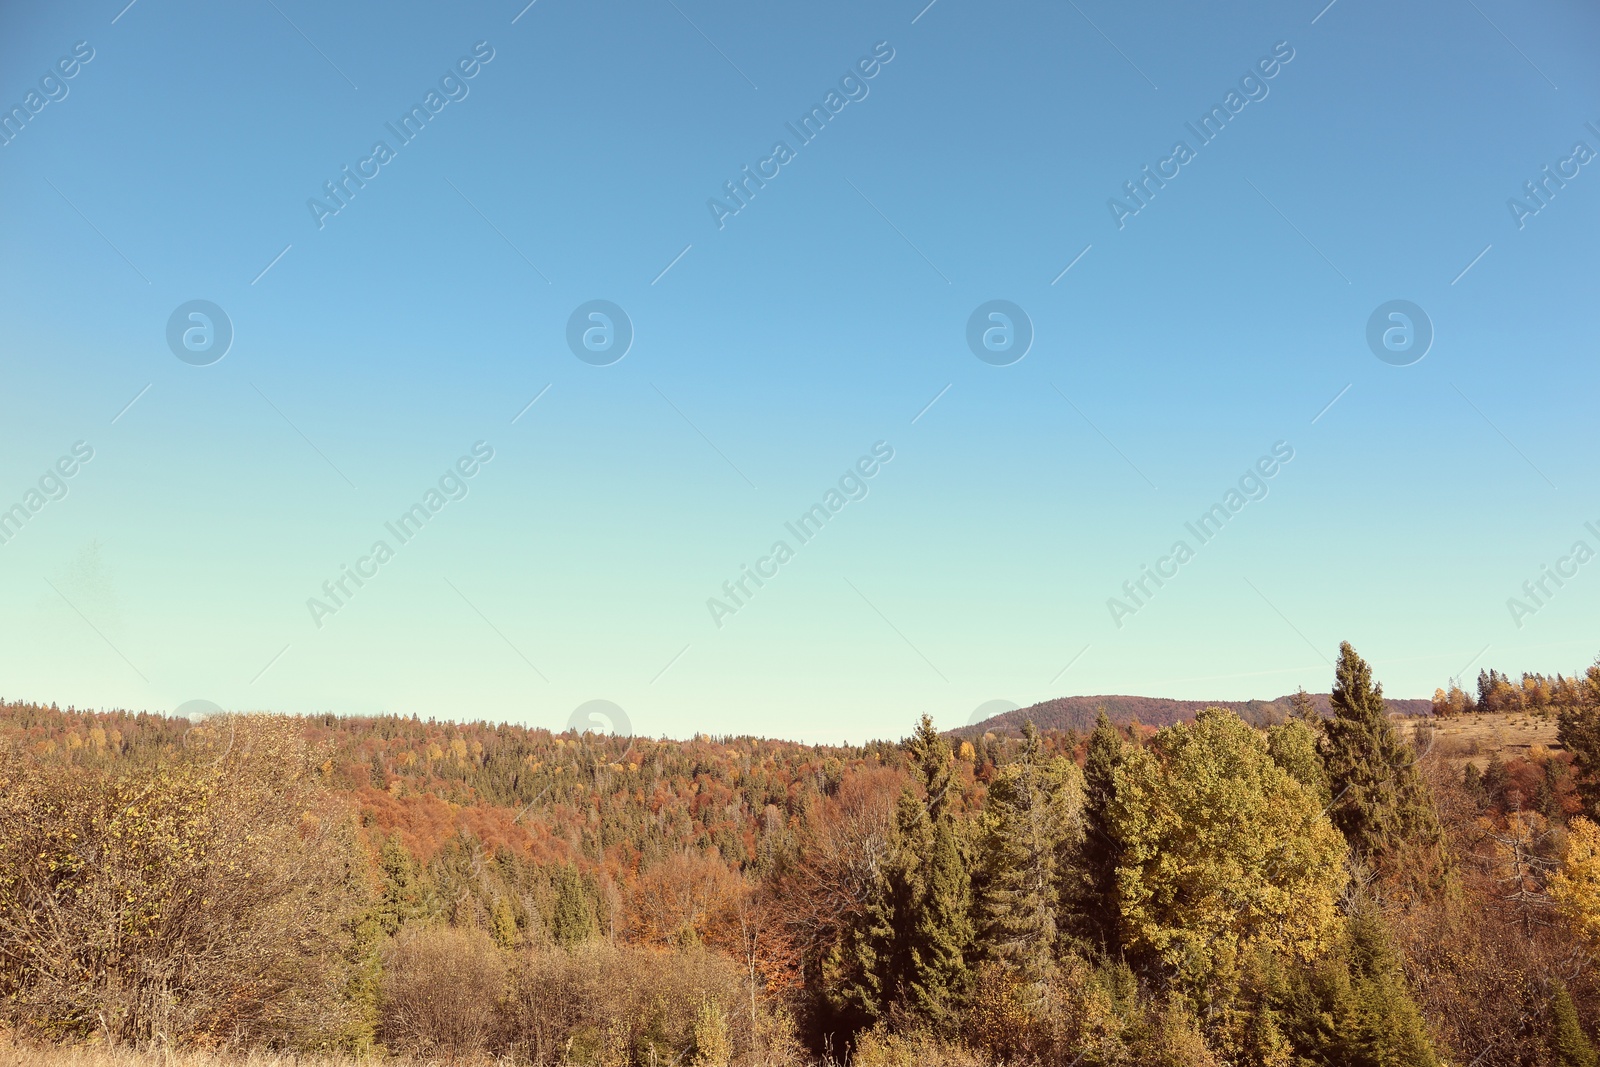 Photo of Picturesque landscape with blue sky over mountains